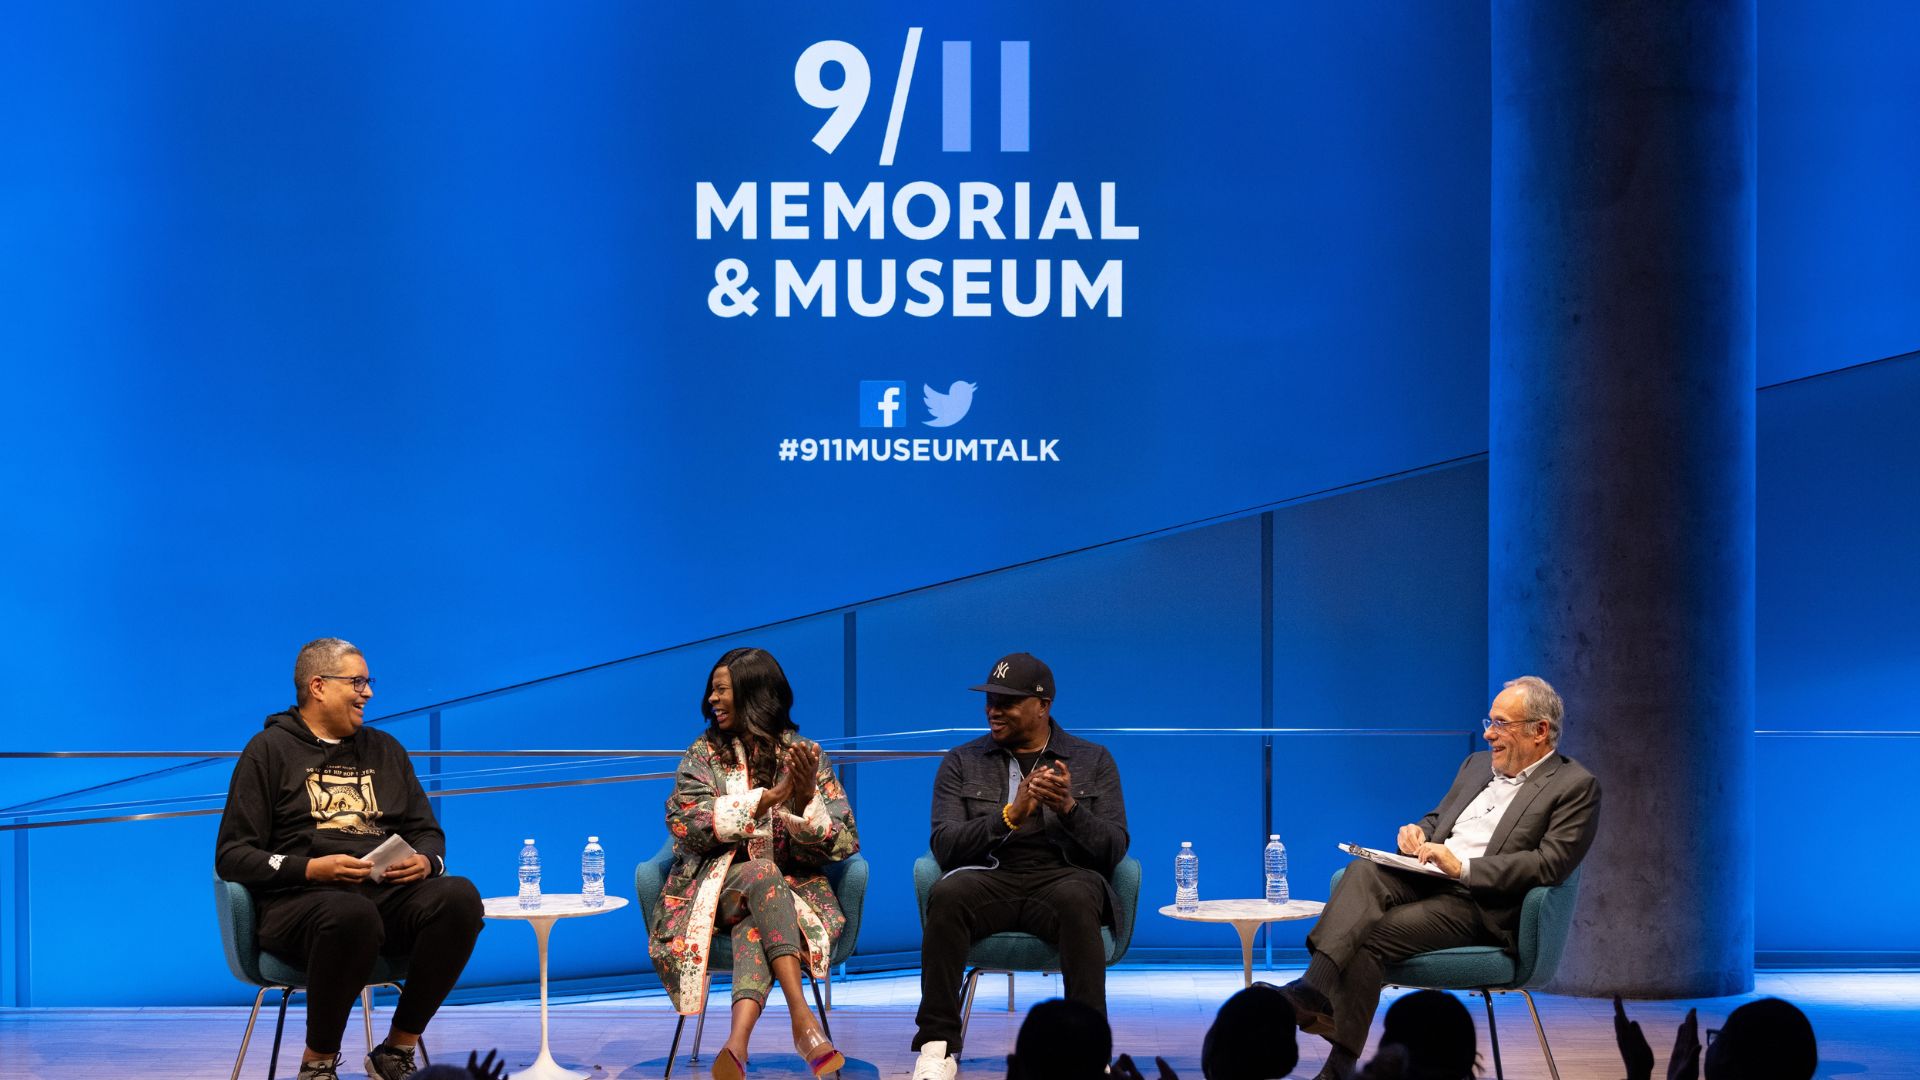 Four speakers on stage during a panel discussion at the Museum, in front of a screen bearing the 9/11 Memorial & Museum logo